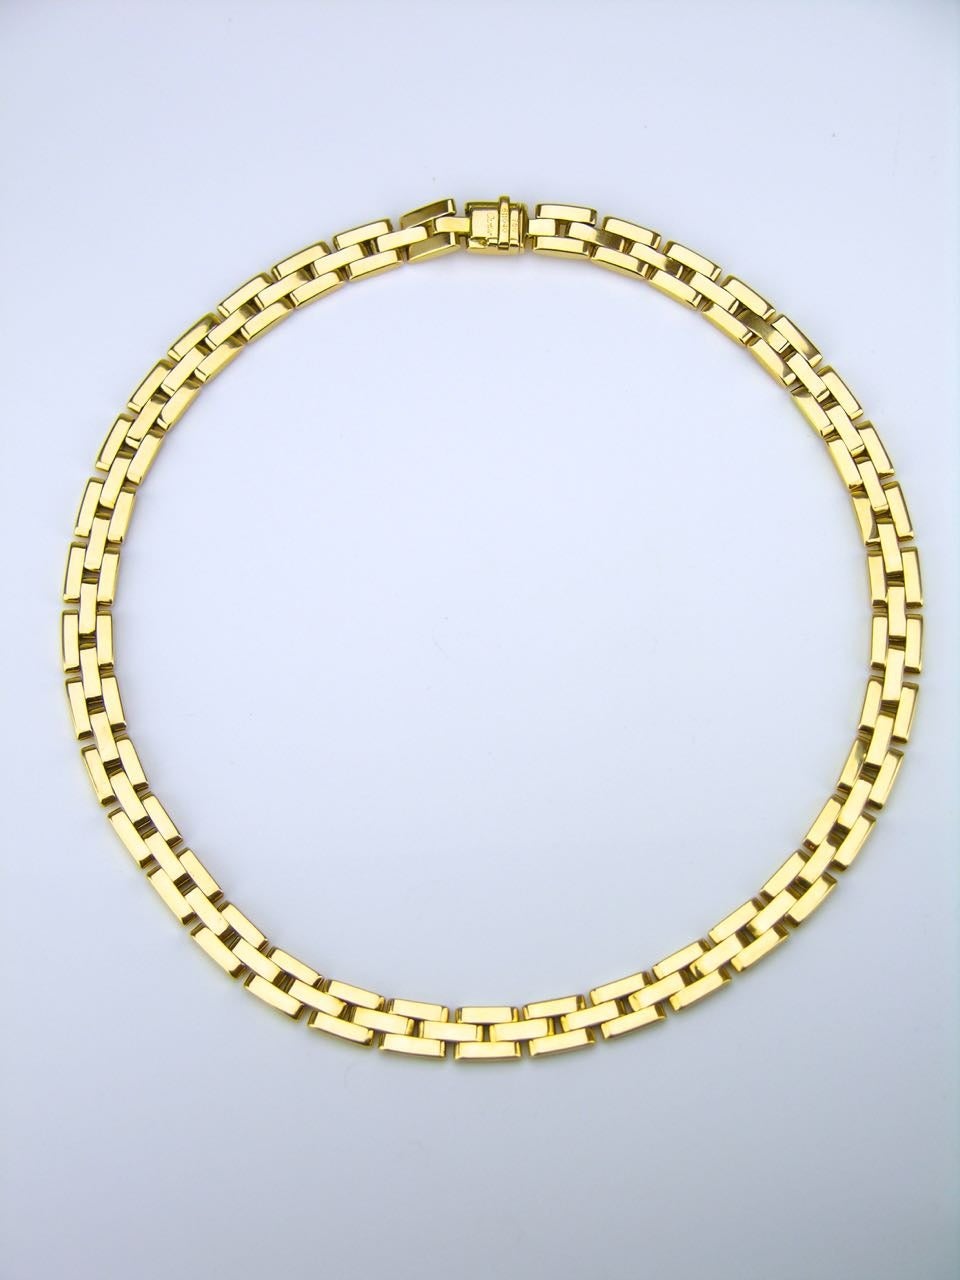 A three row gatelink style flat collar necklace in solid 18k yellow gold with a concealed safety catch.  Each link is gently domed with a flat back. The quality and weight of this elegant piece is all you would expect from one of the best jewellery